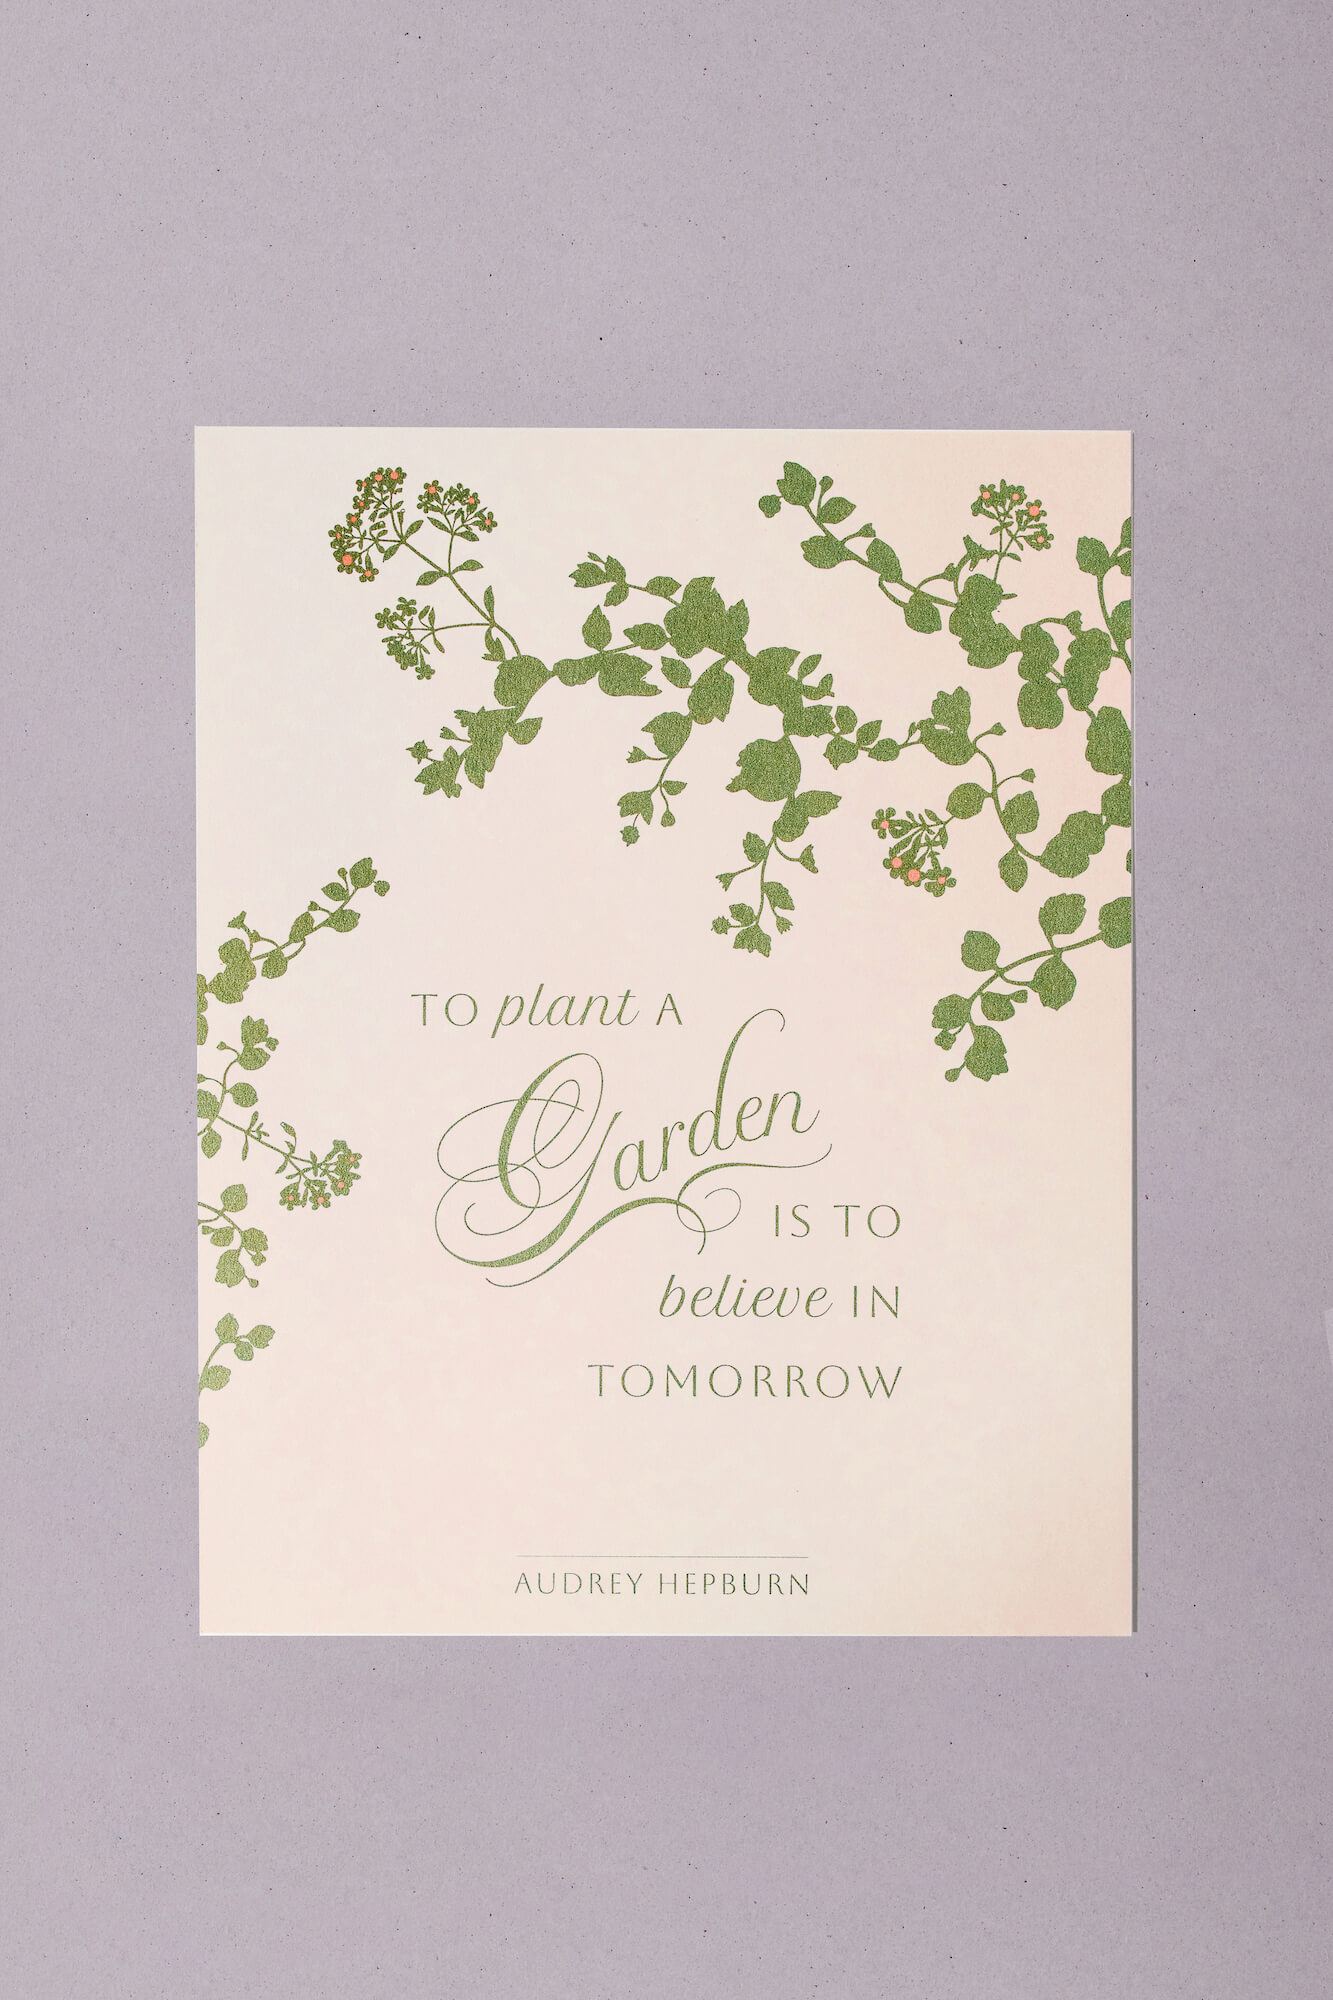 Audrey Hepburn quote designed with free Springtime fonts from Google fonts.